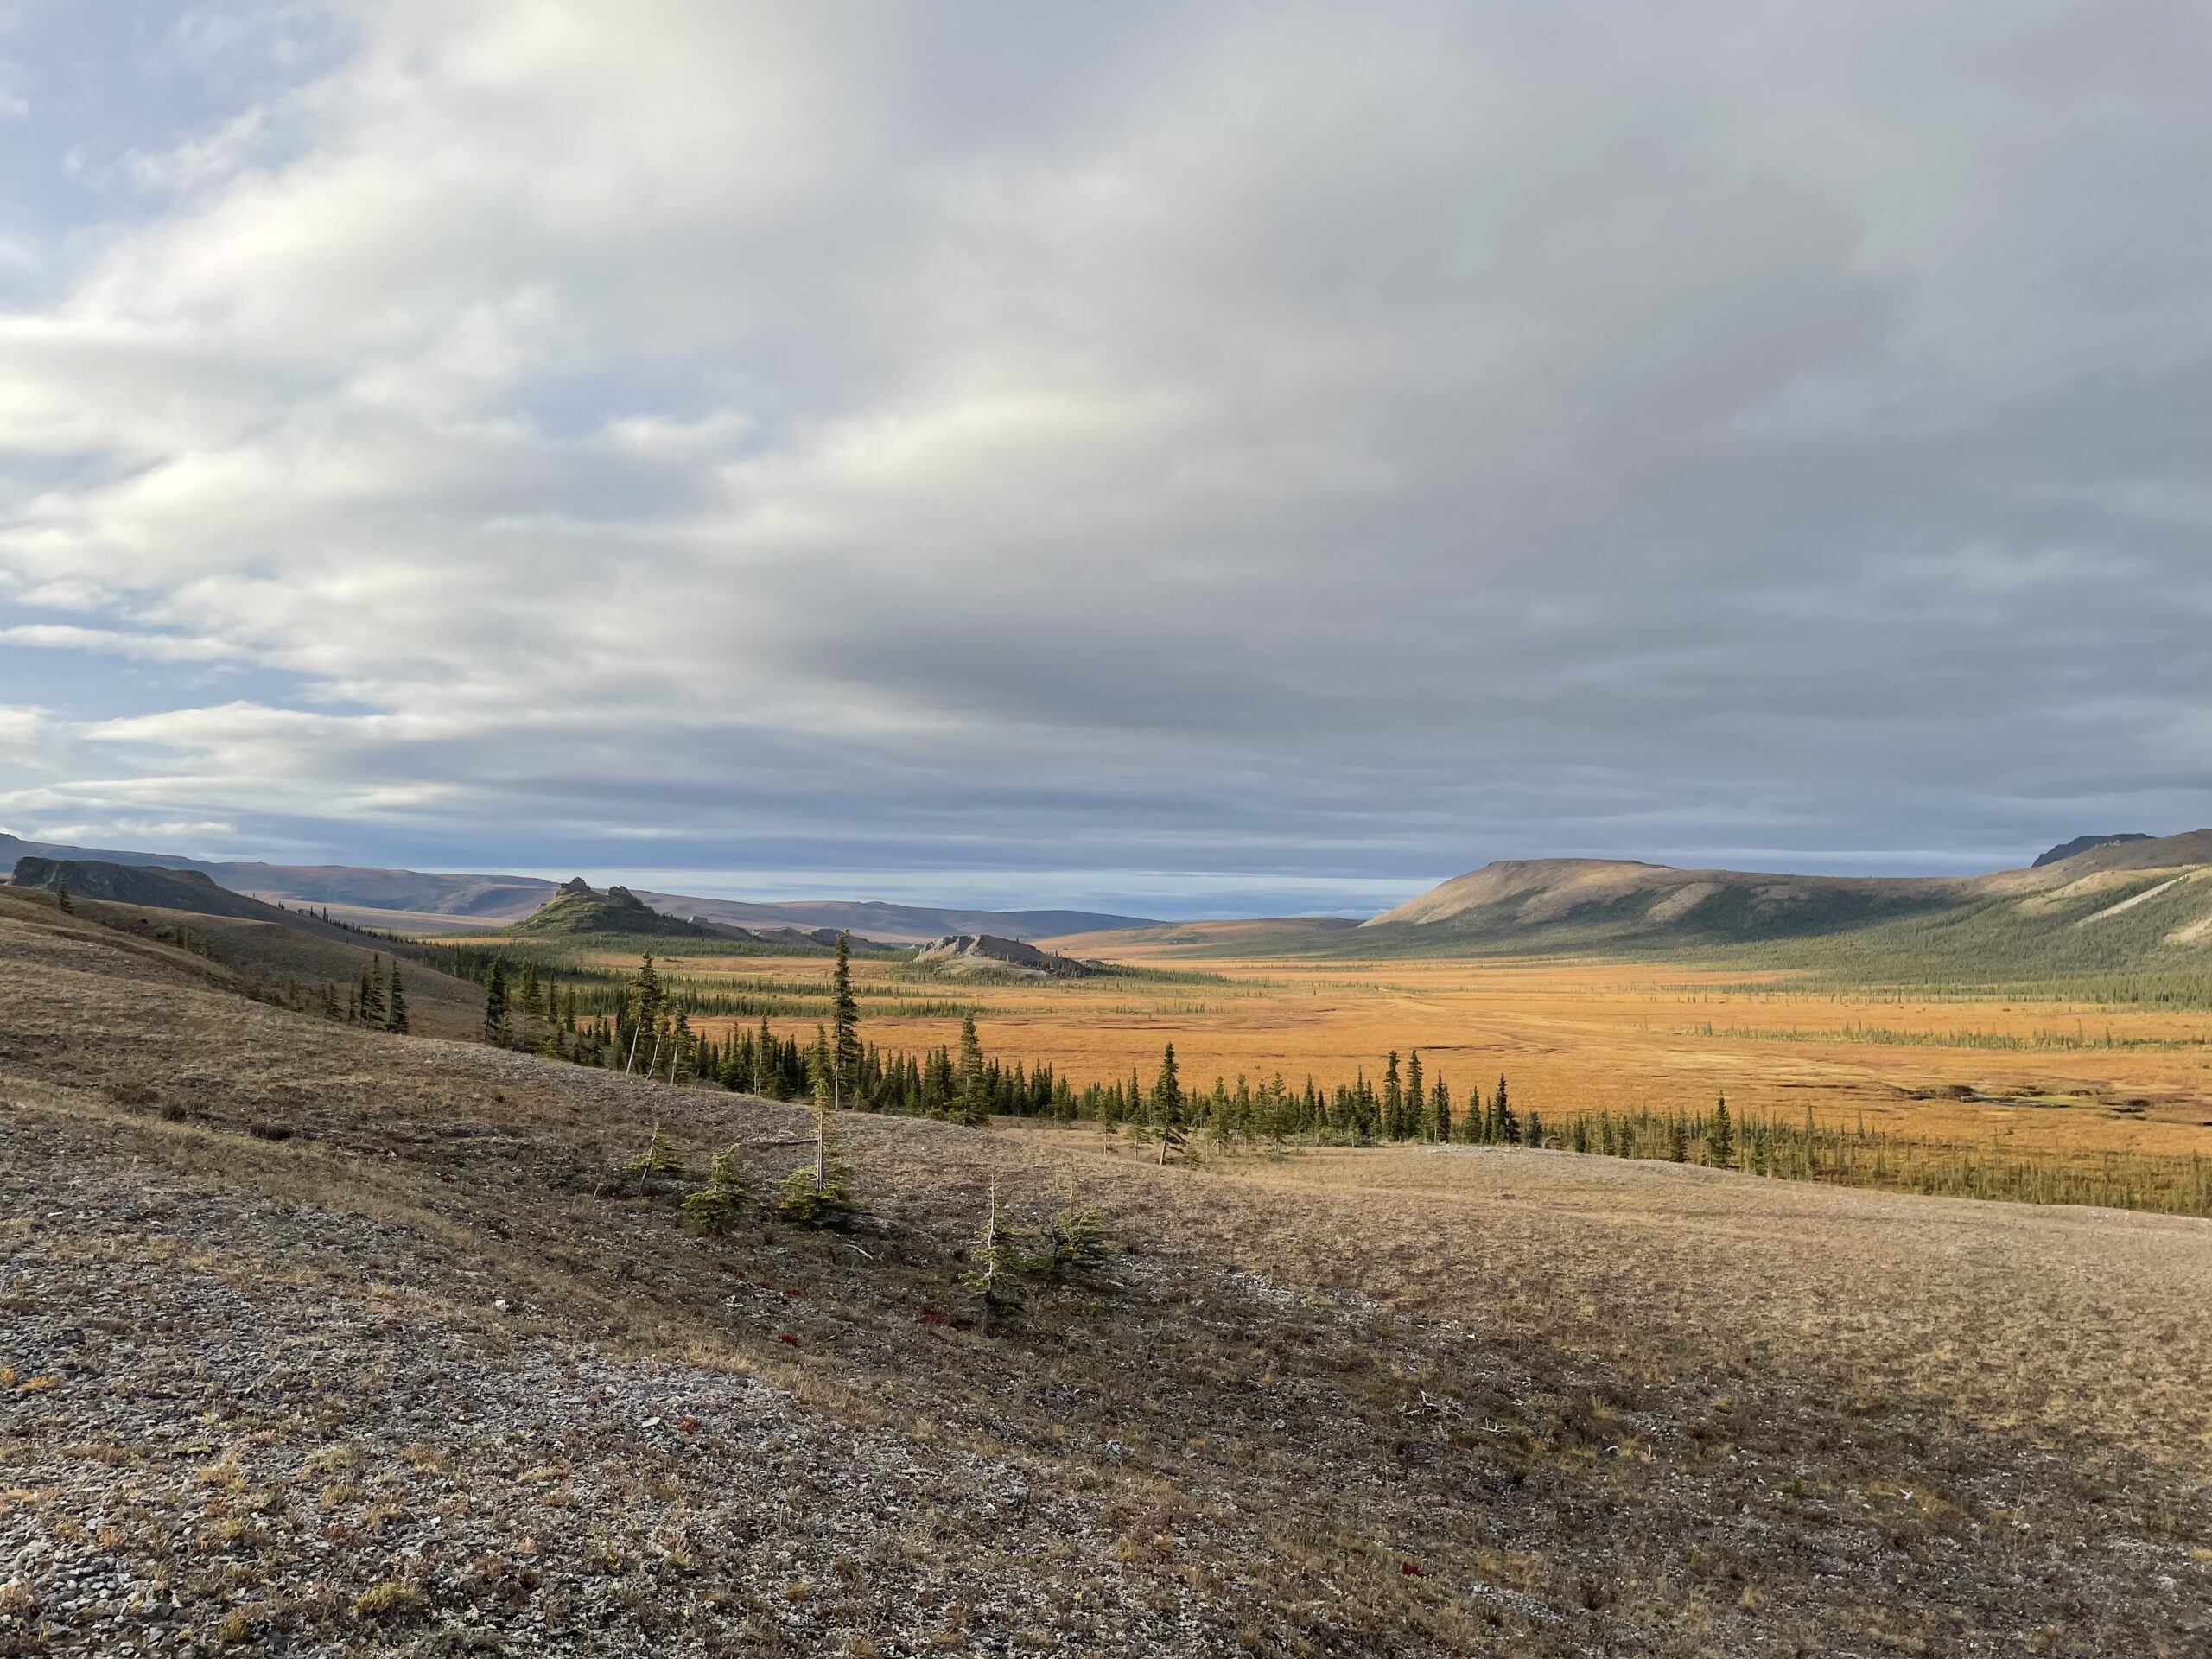 Spruce trees dot an otherwise tree-less tundra landscape.